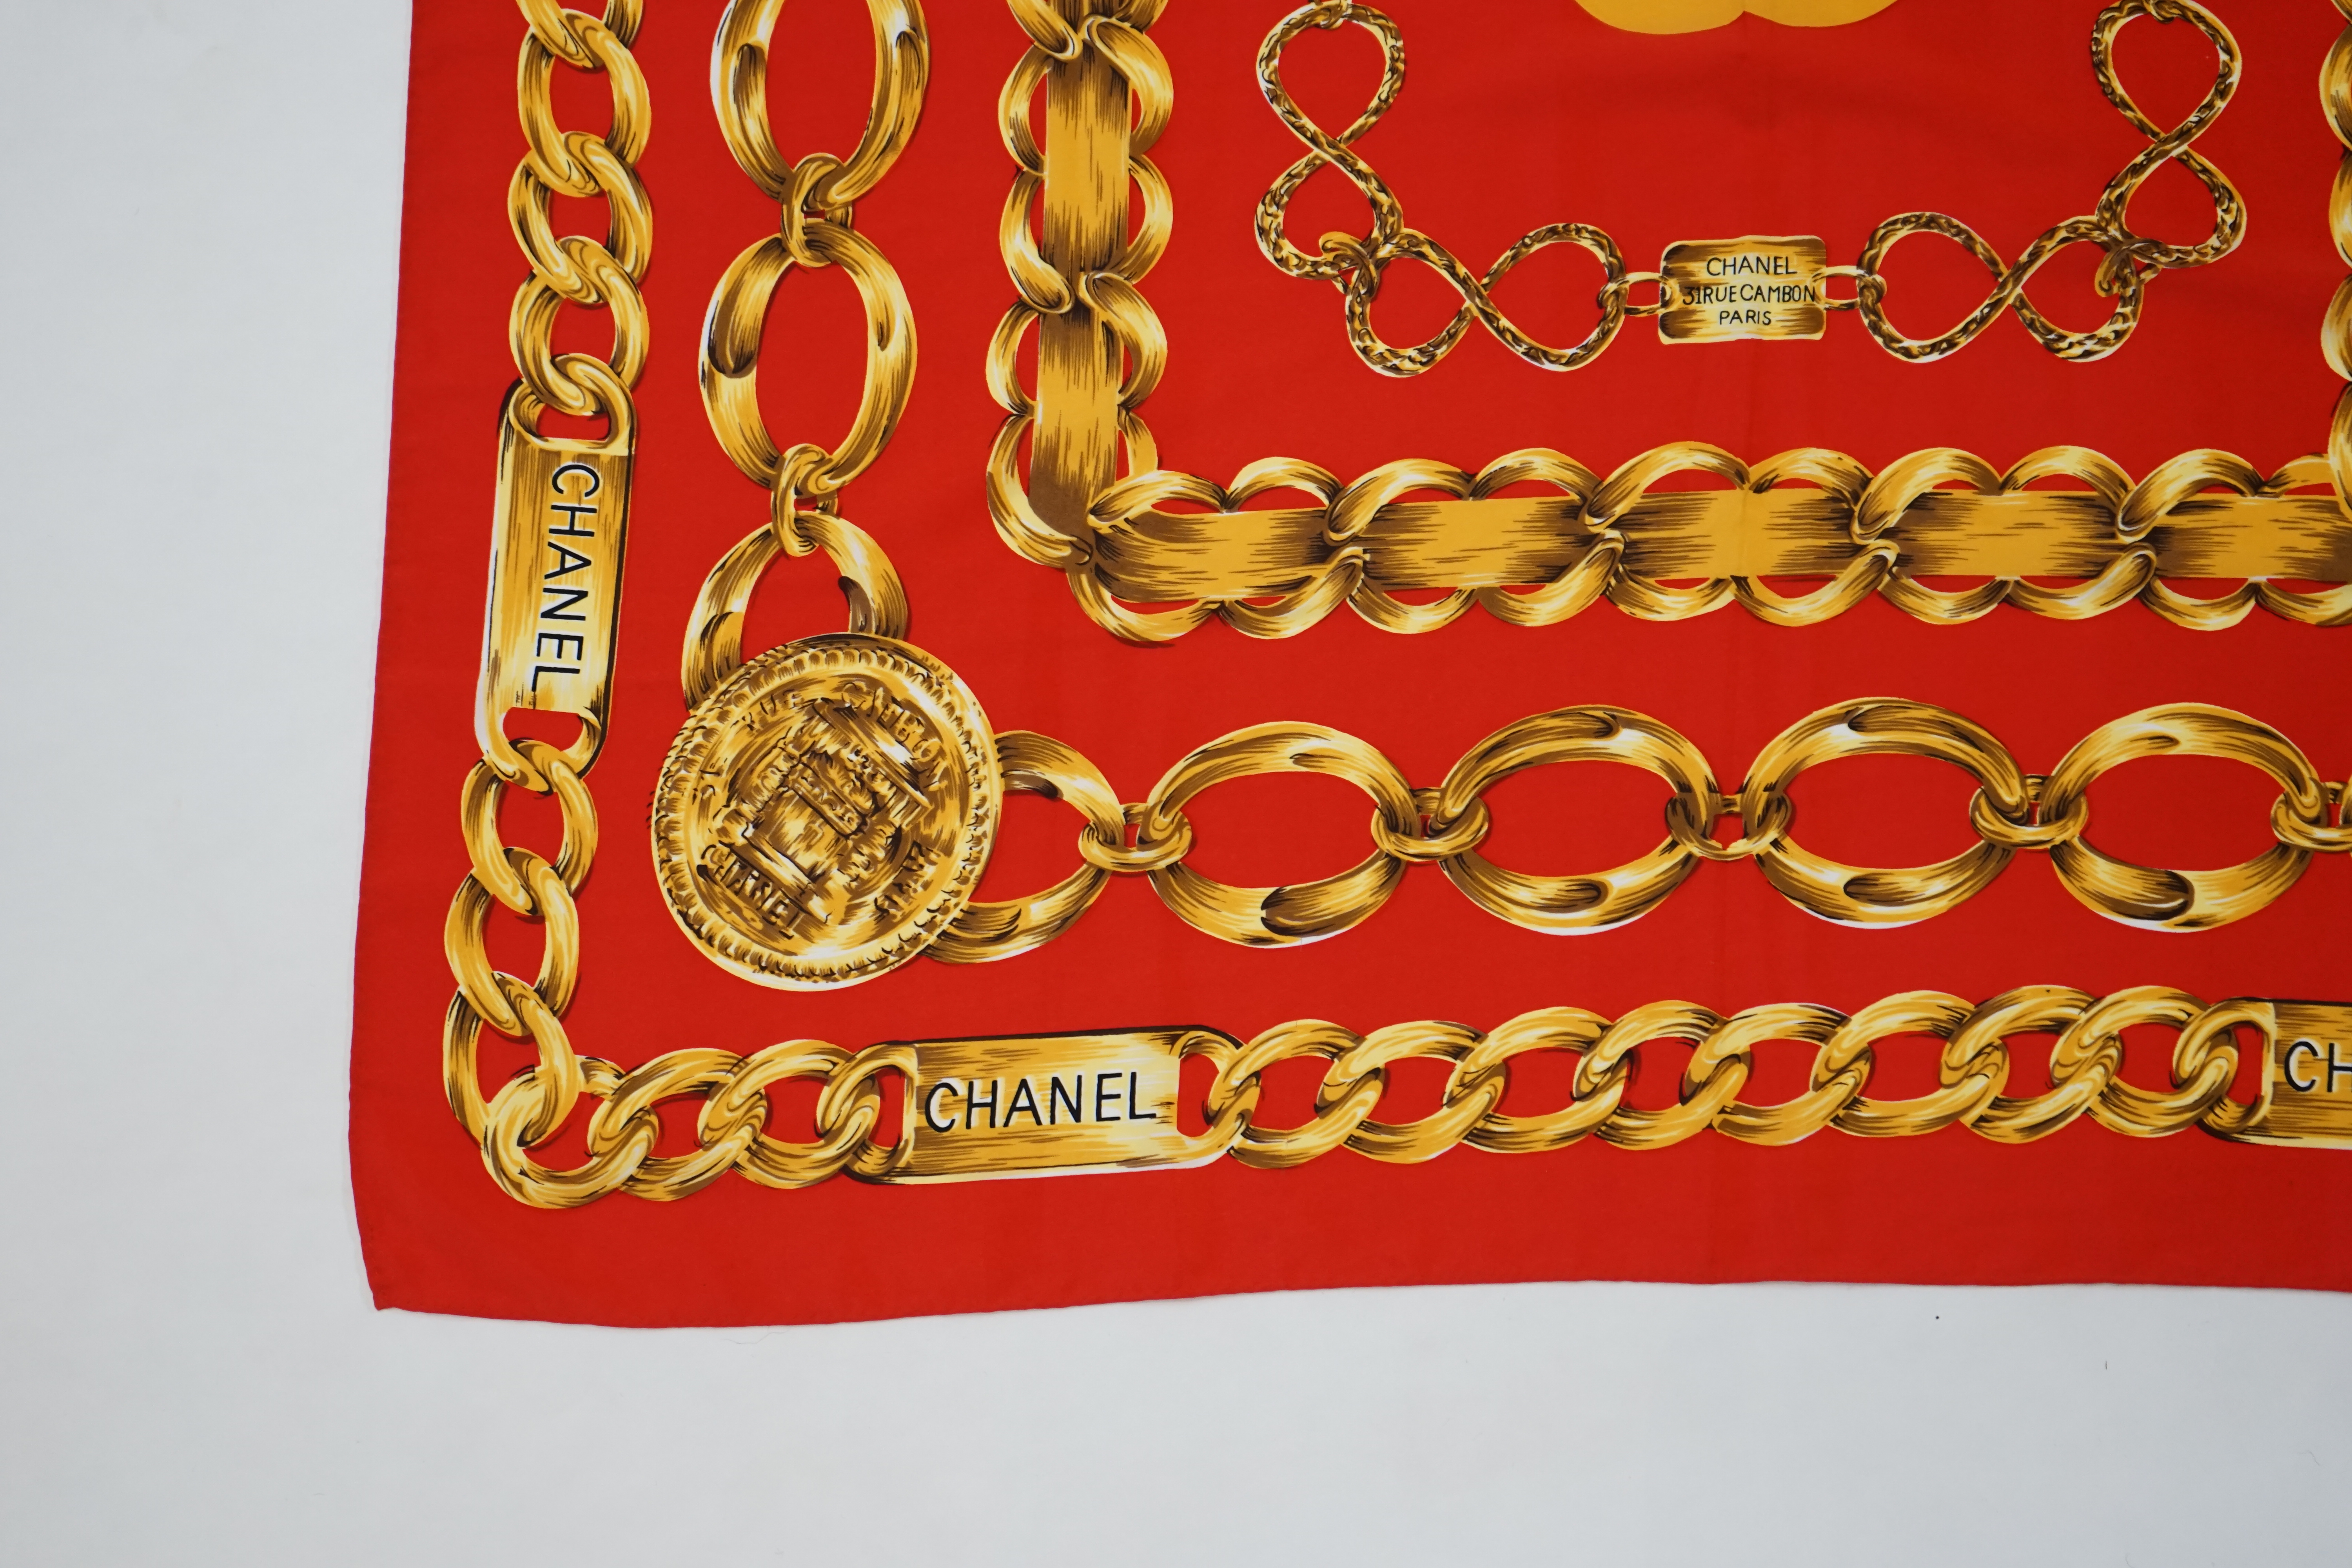 A Chanel Red Chain large silk scarf, 80cm x 80cm